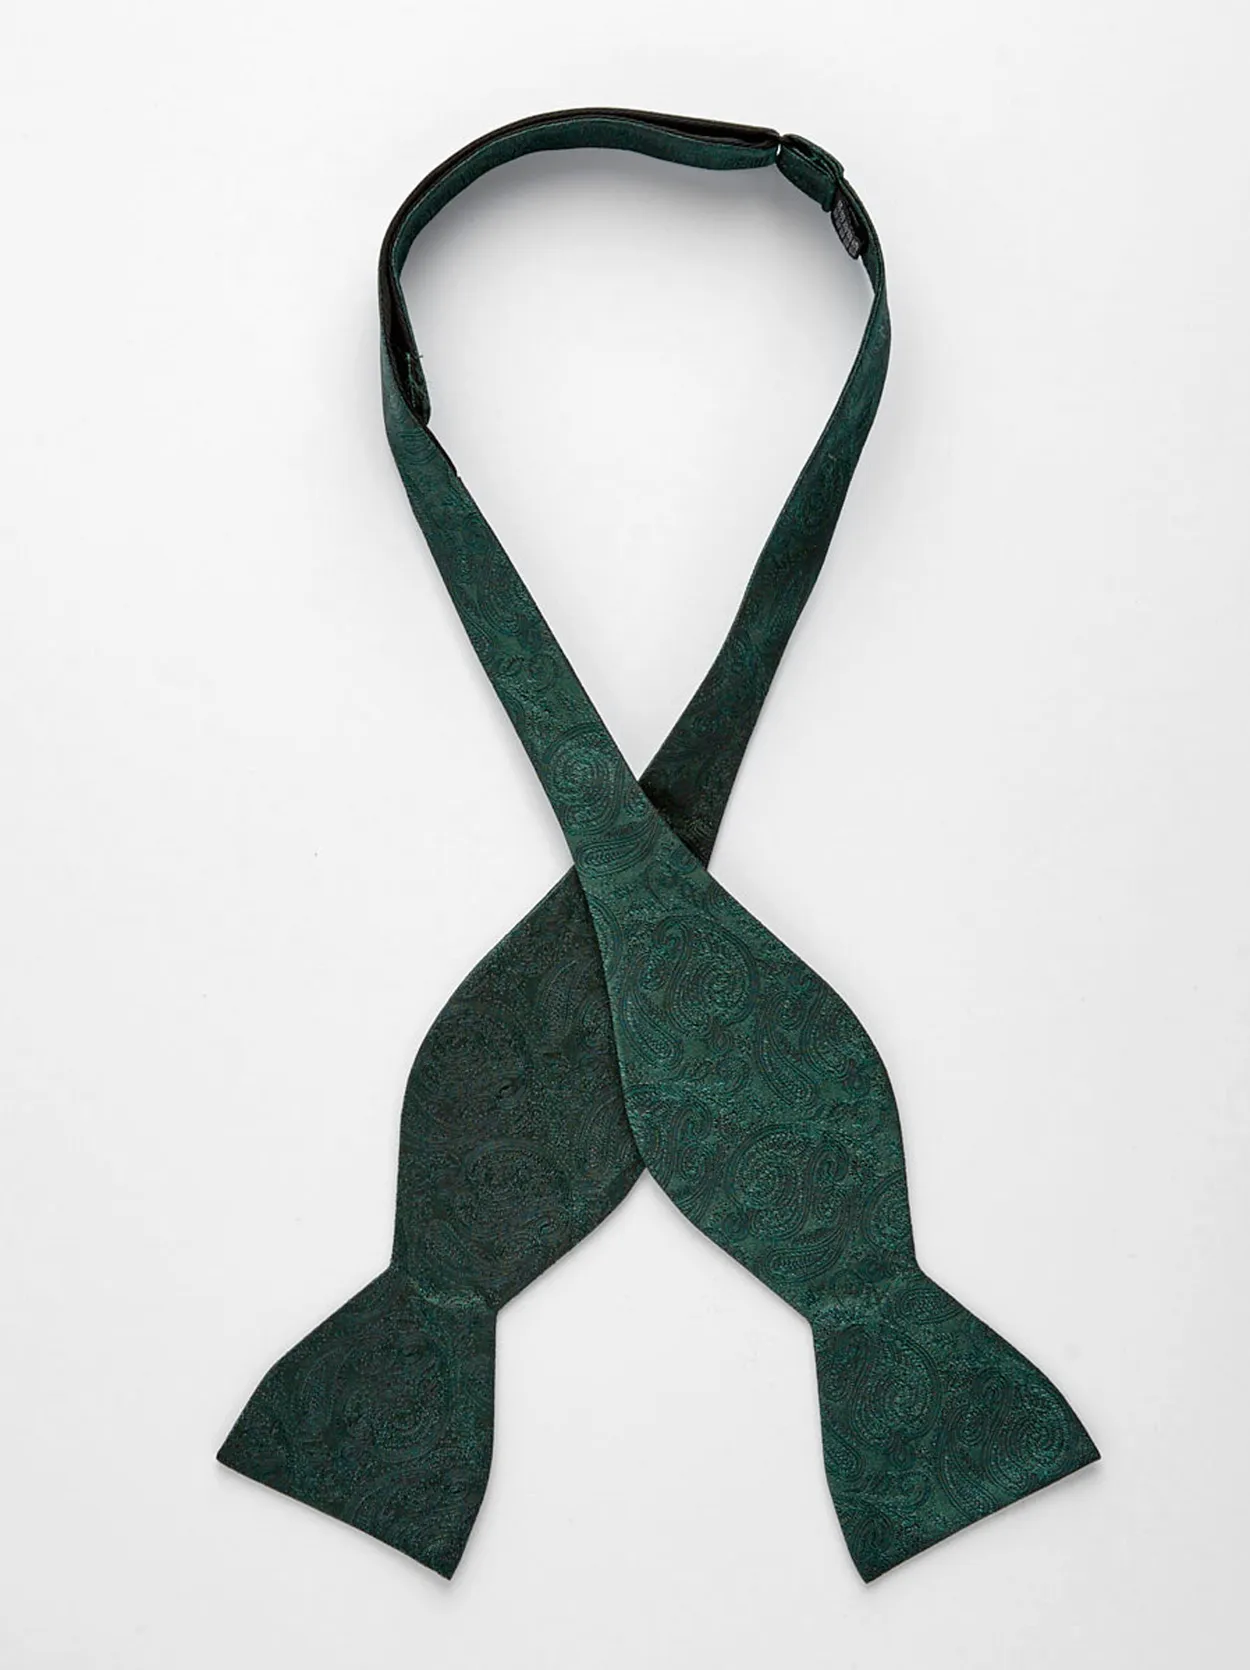 Green Bow Tie Formal 